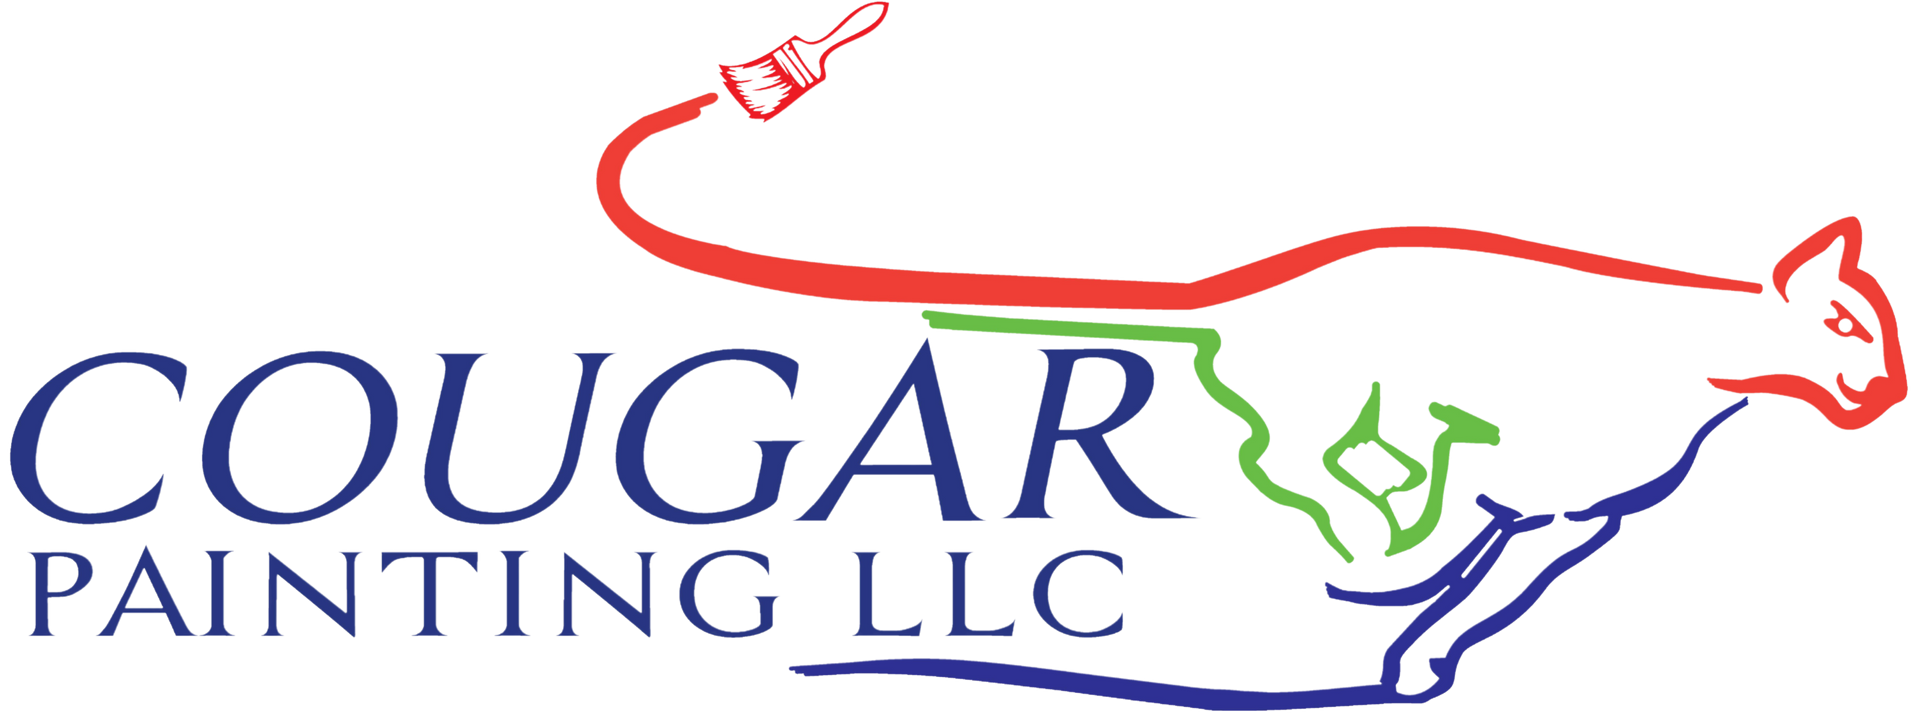 The logo for cougar painting llc has a cougar on it.